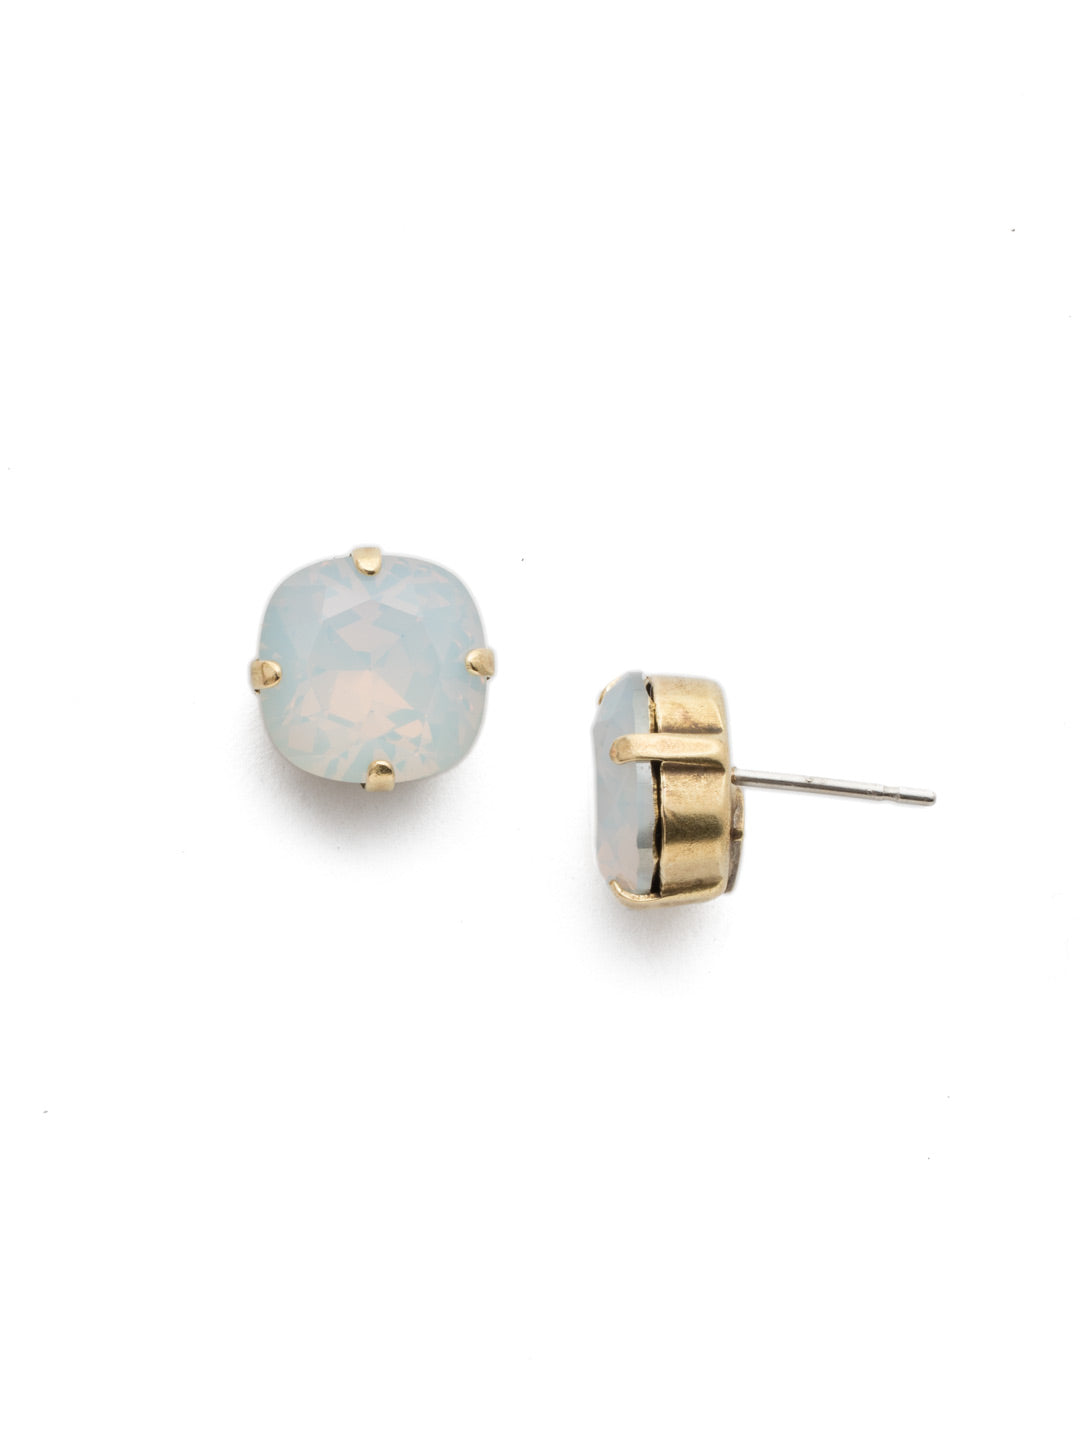 Halcyon Stud Earrings - EDH25AGWO - <p>A beautiful, luminous cushion-cut crystal in a classic four-pronged setting that's ideal for everyday wear. From Sorrelli's White Opal collection in our Antique Gold-tone finish.</p>